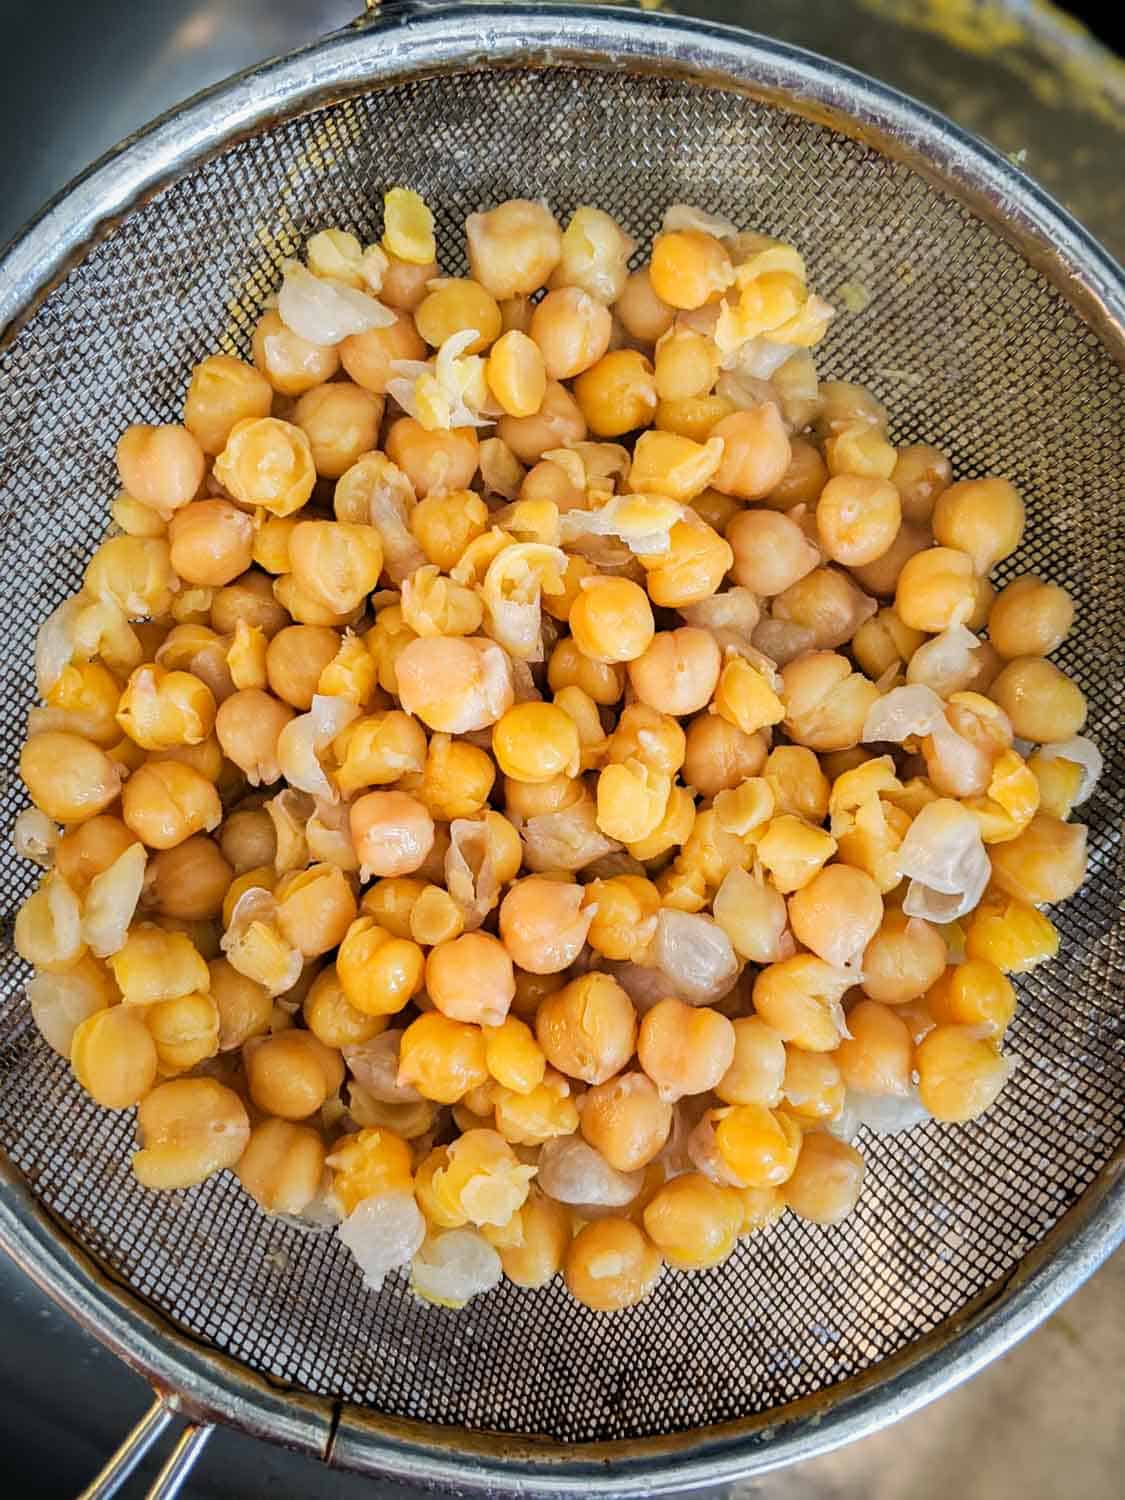 Cooked chickpeas also known as garbanzo beans in a strainer